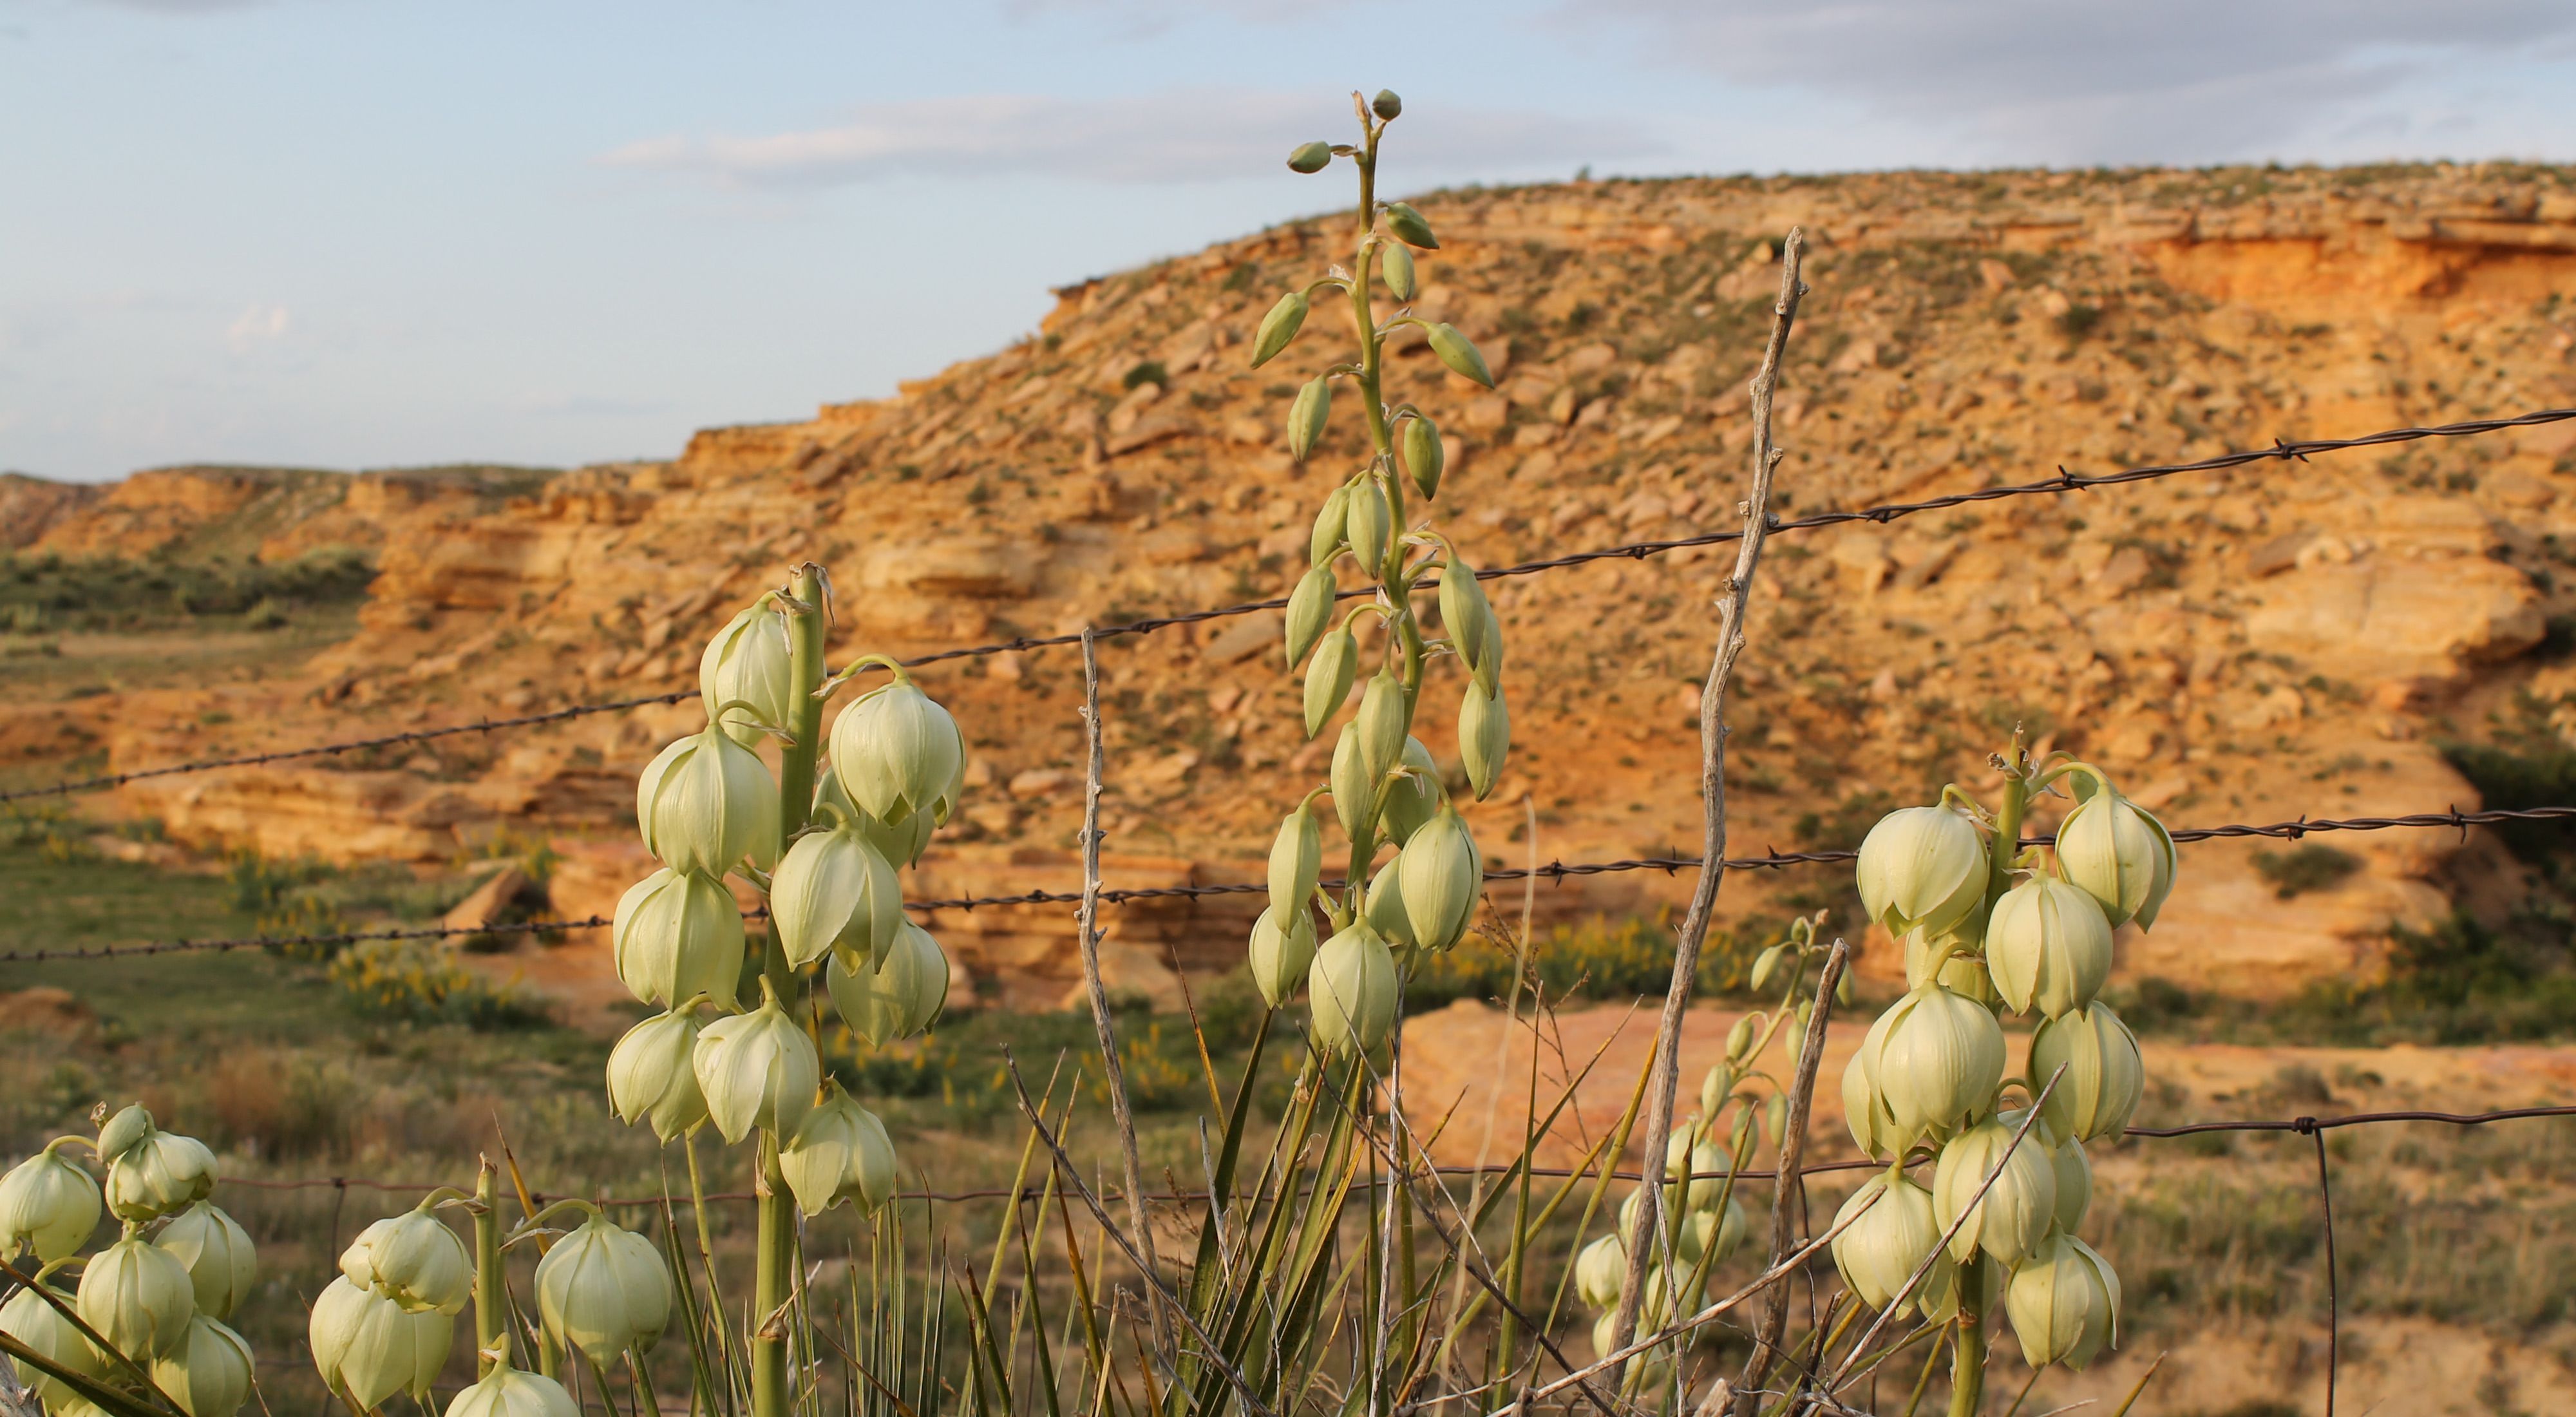 Light green yucca flowers growing in front of a barbed wire fence, with red bluffs in the background.